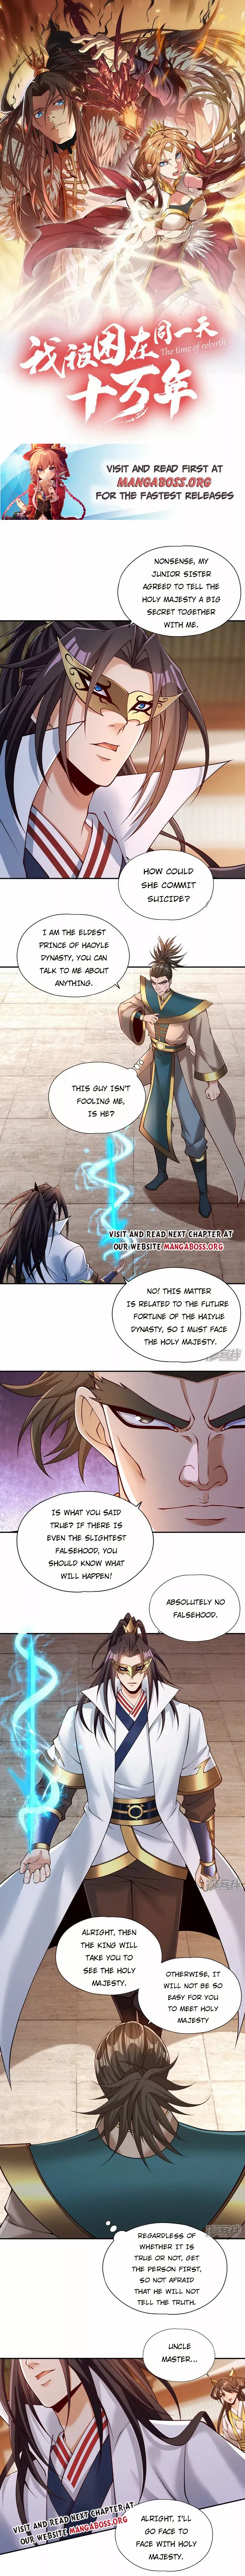 The Time Of Rebirth - Page 2